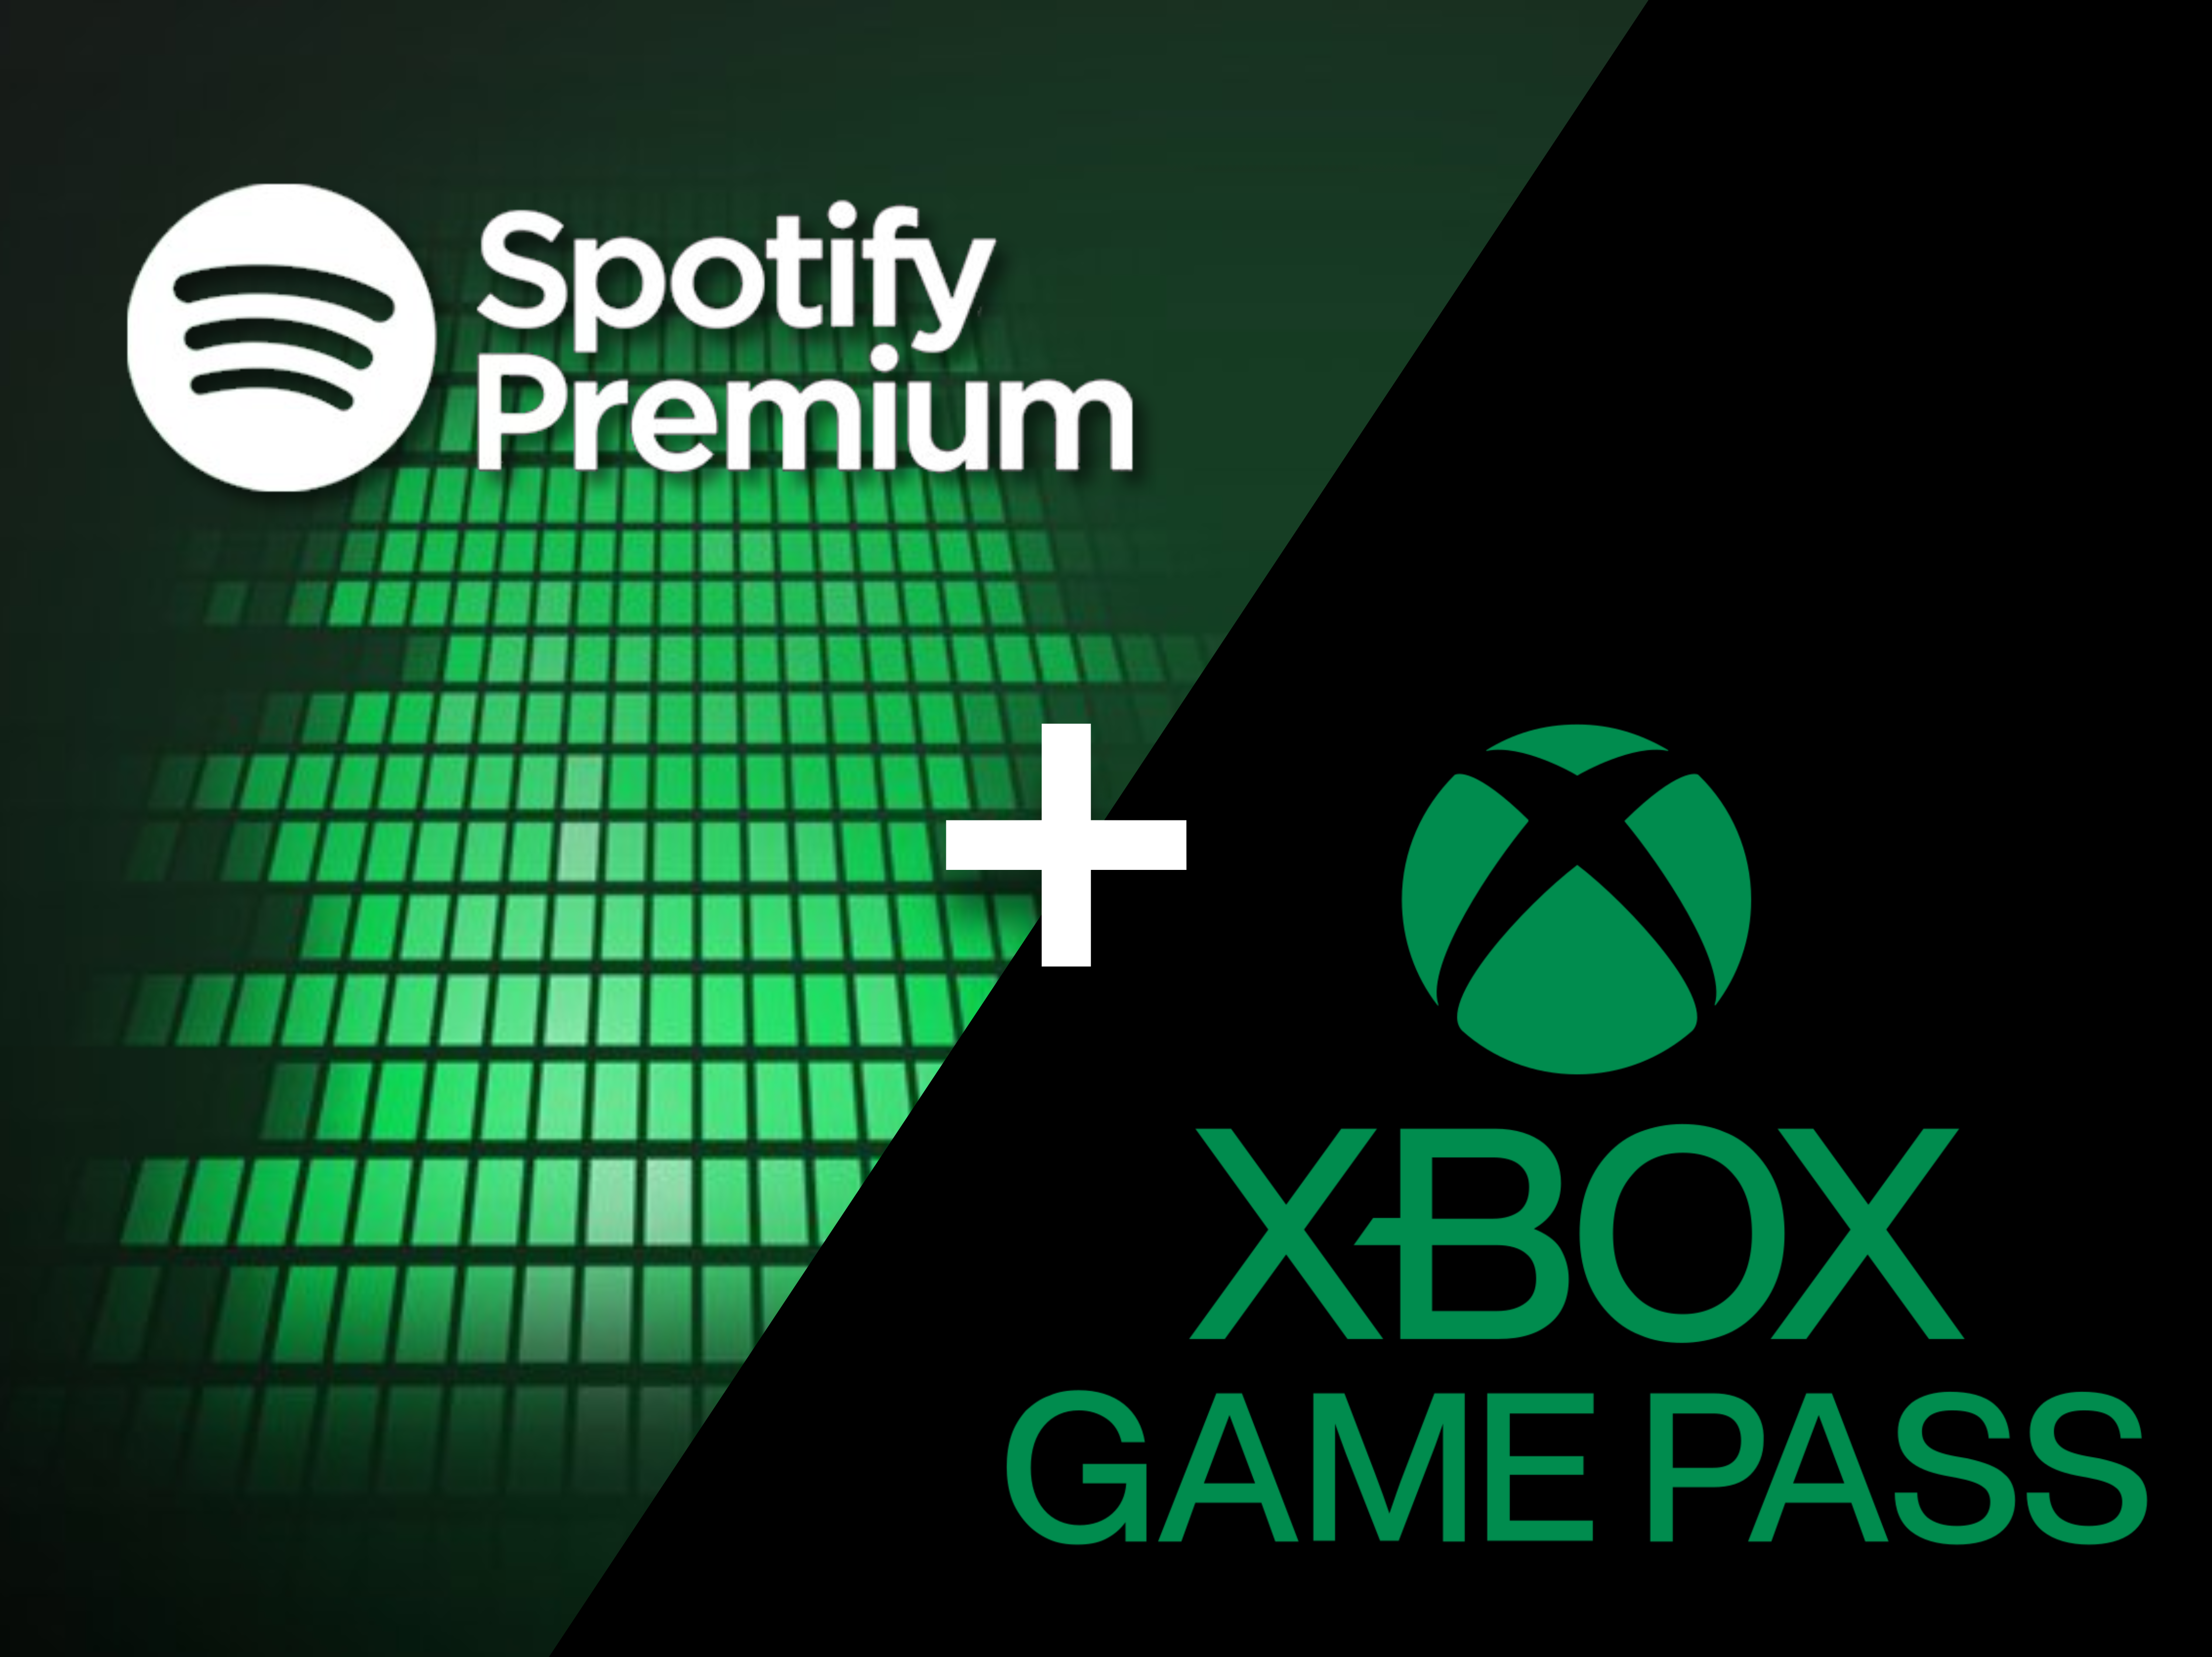 How to get free 4-months Spotify Premium with Xbox Game Pass Ultimate